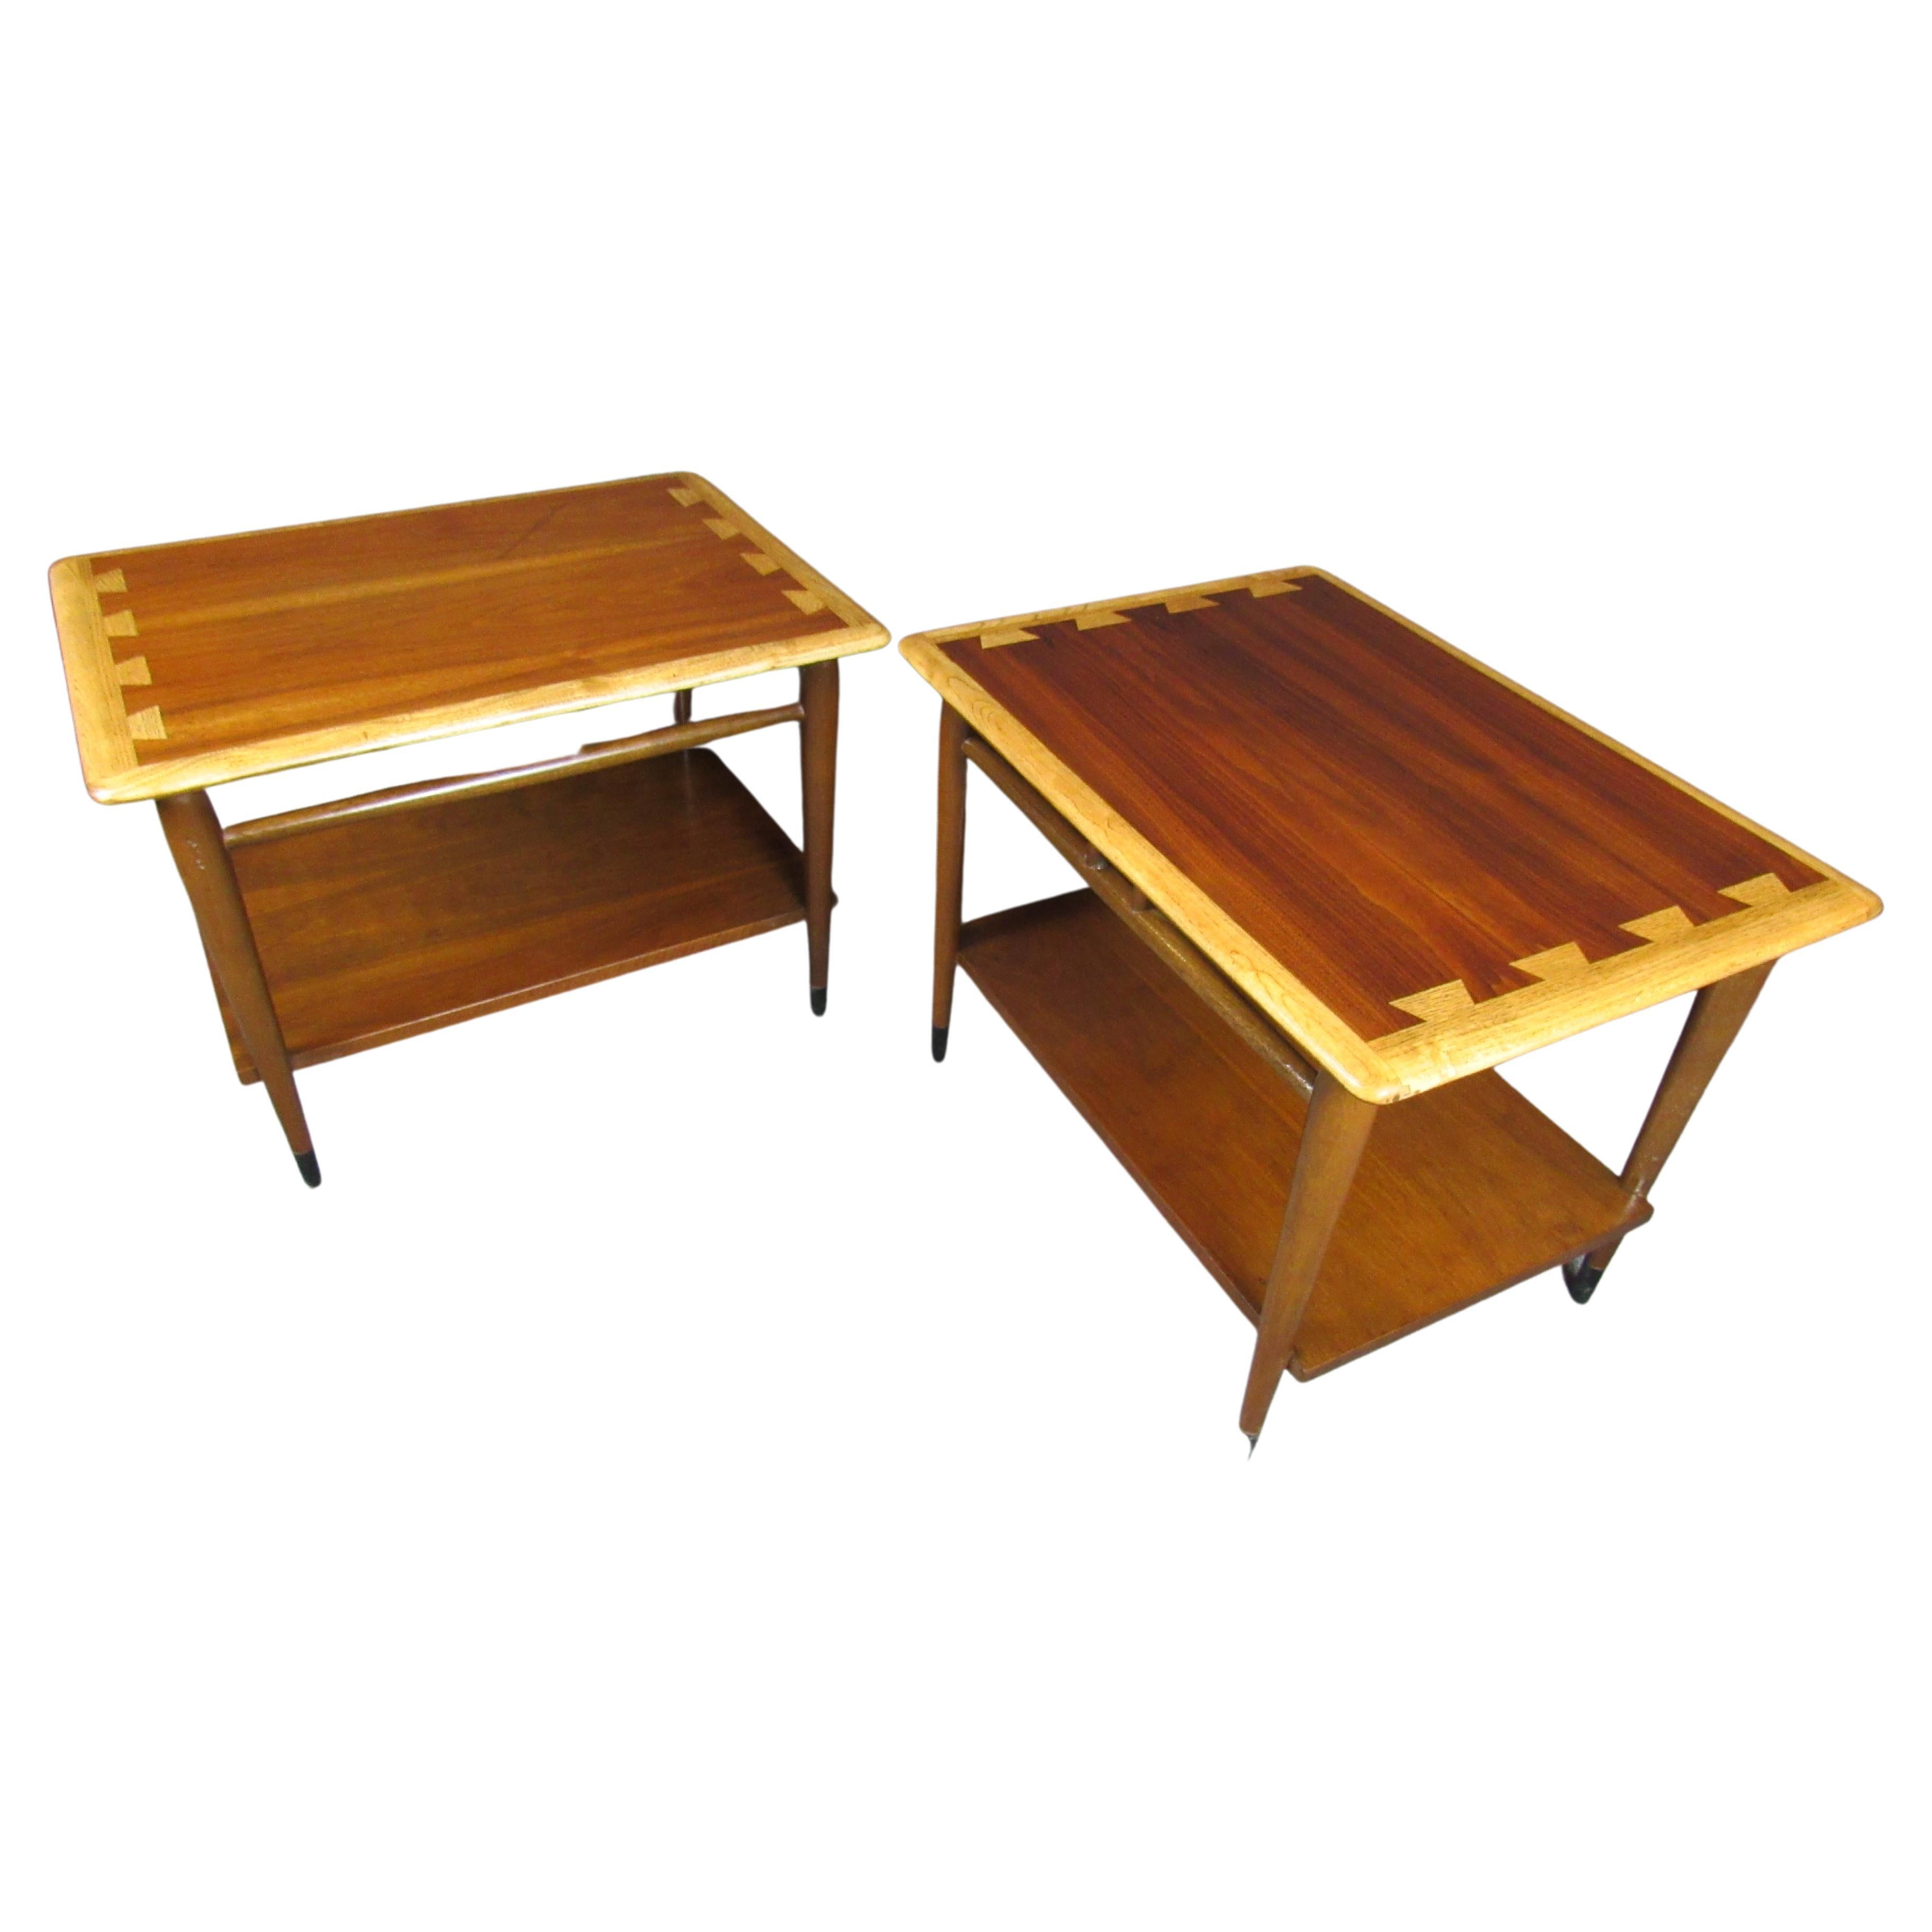 Pair of Mid-Century Modern Side Tables by Lane For Sale